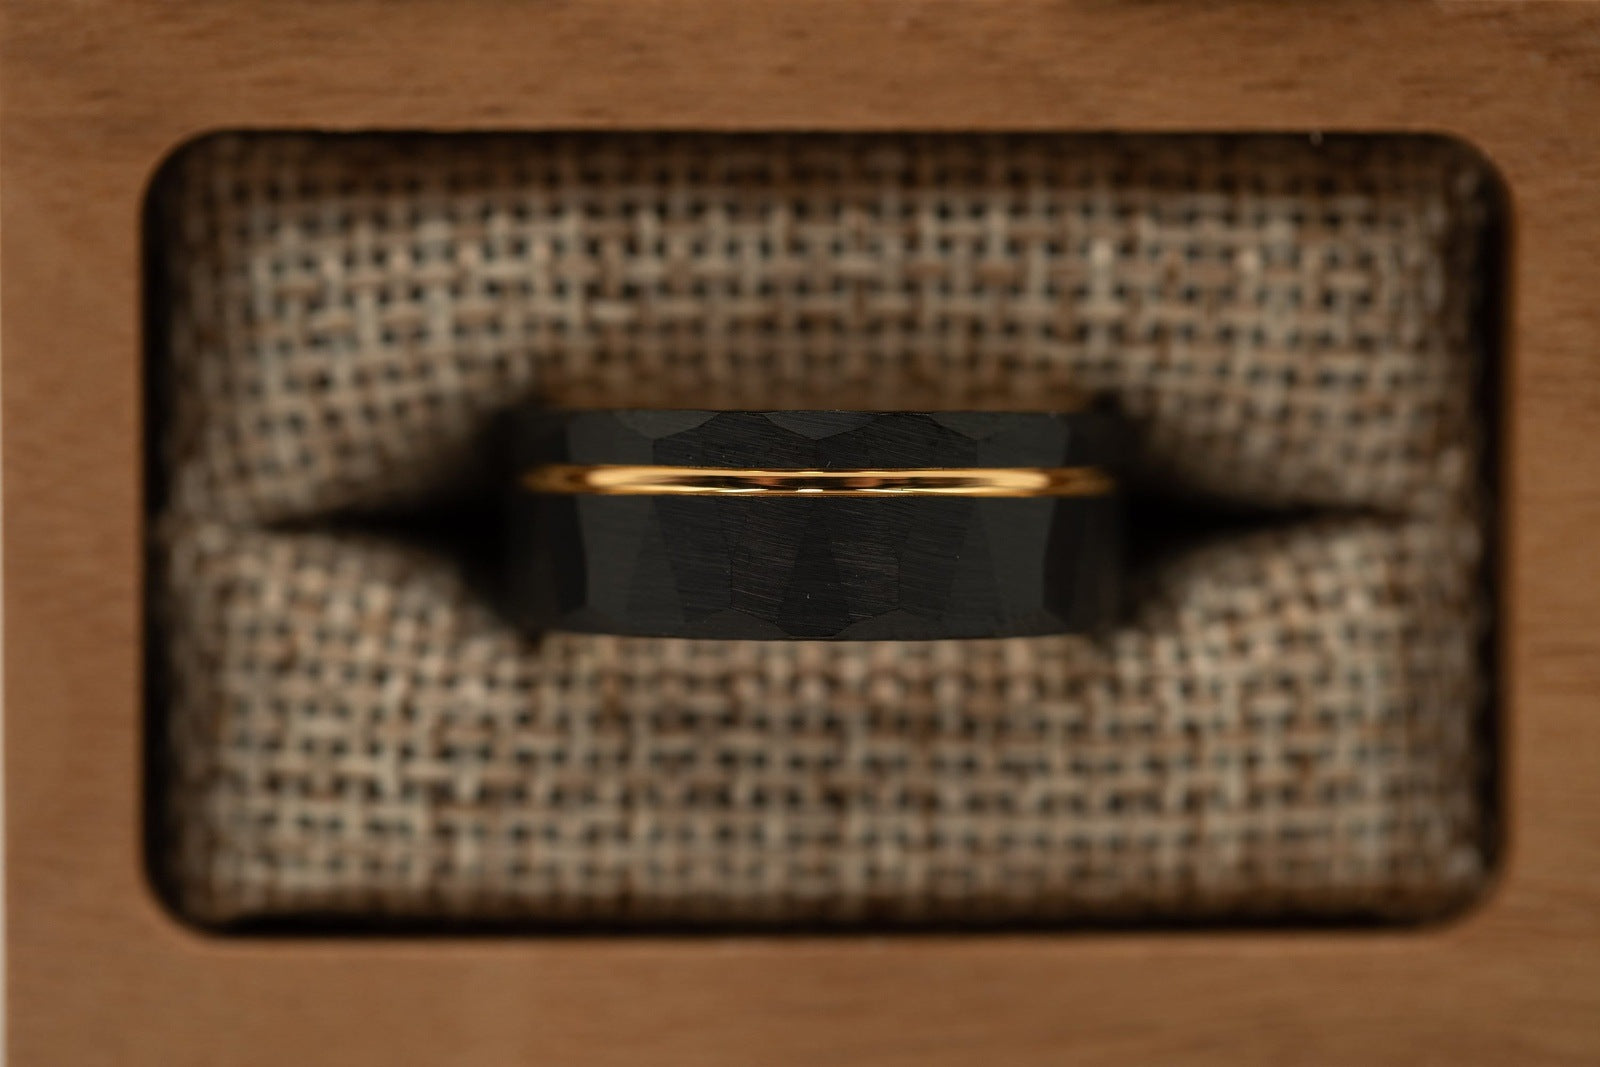 Hammered Black Tungsten Wedding Ring with Polished Rose Gold Inner Band inside walnut ring box between burlap cushions